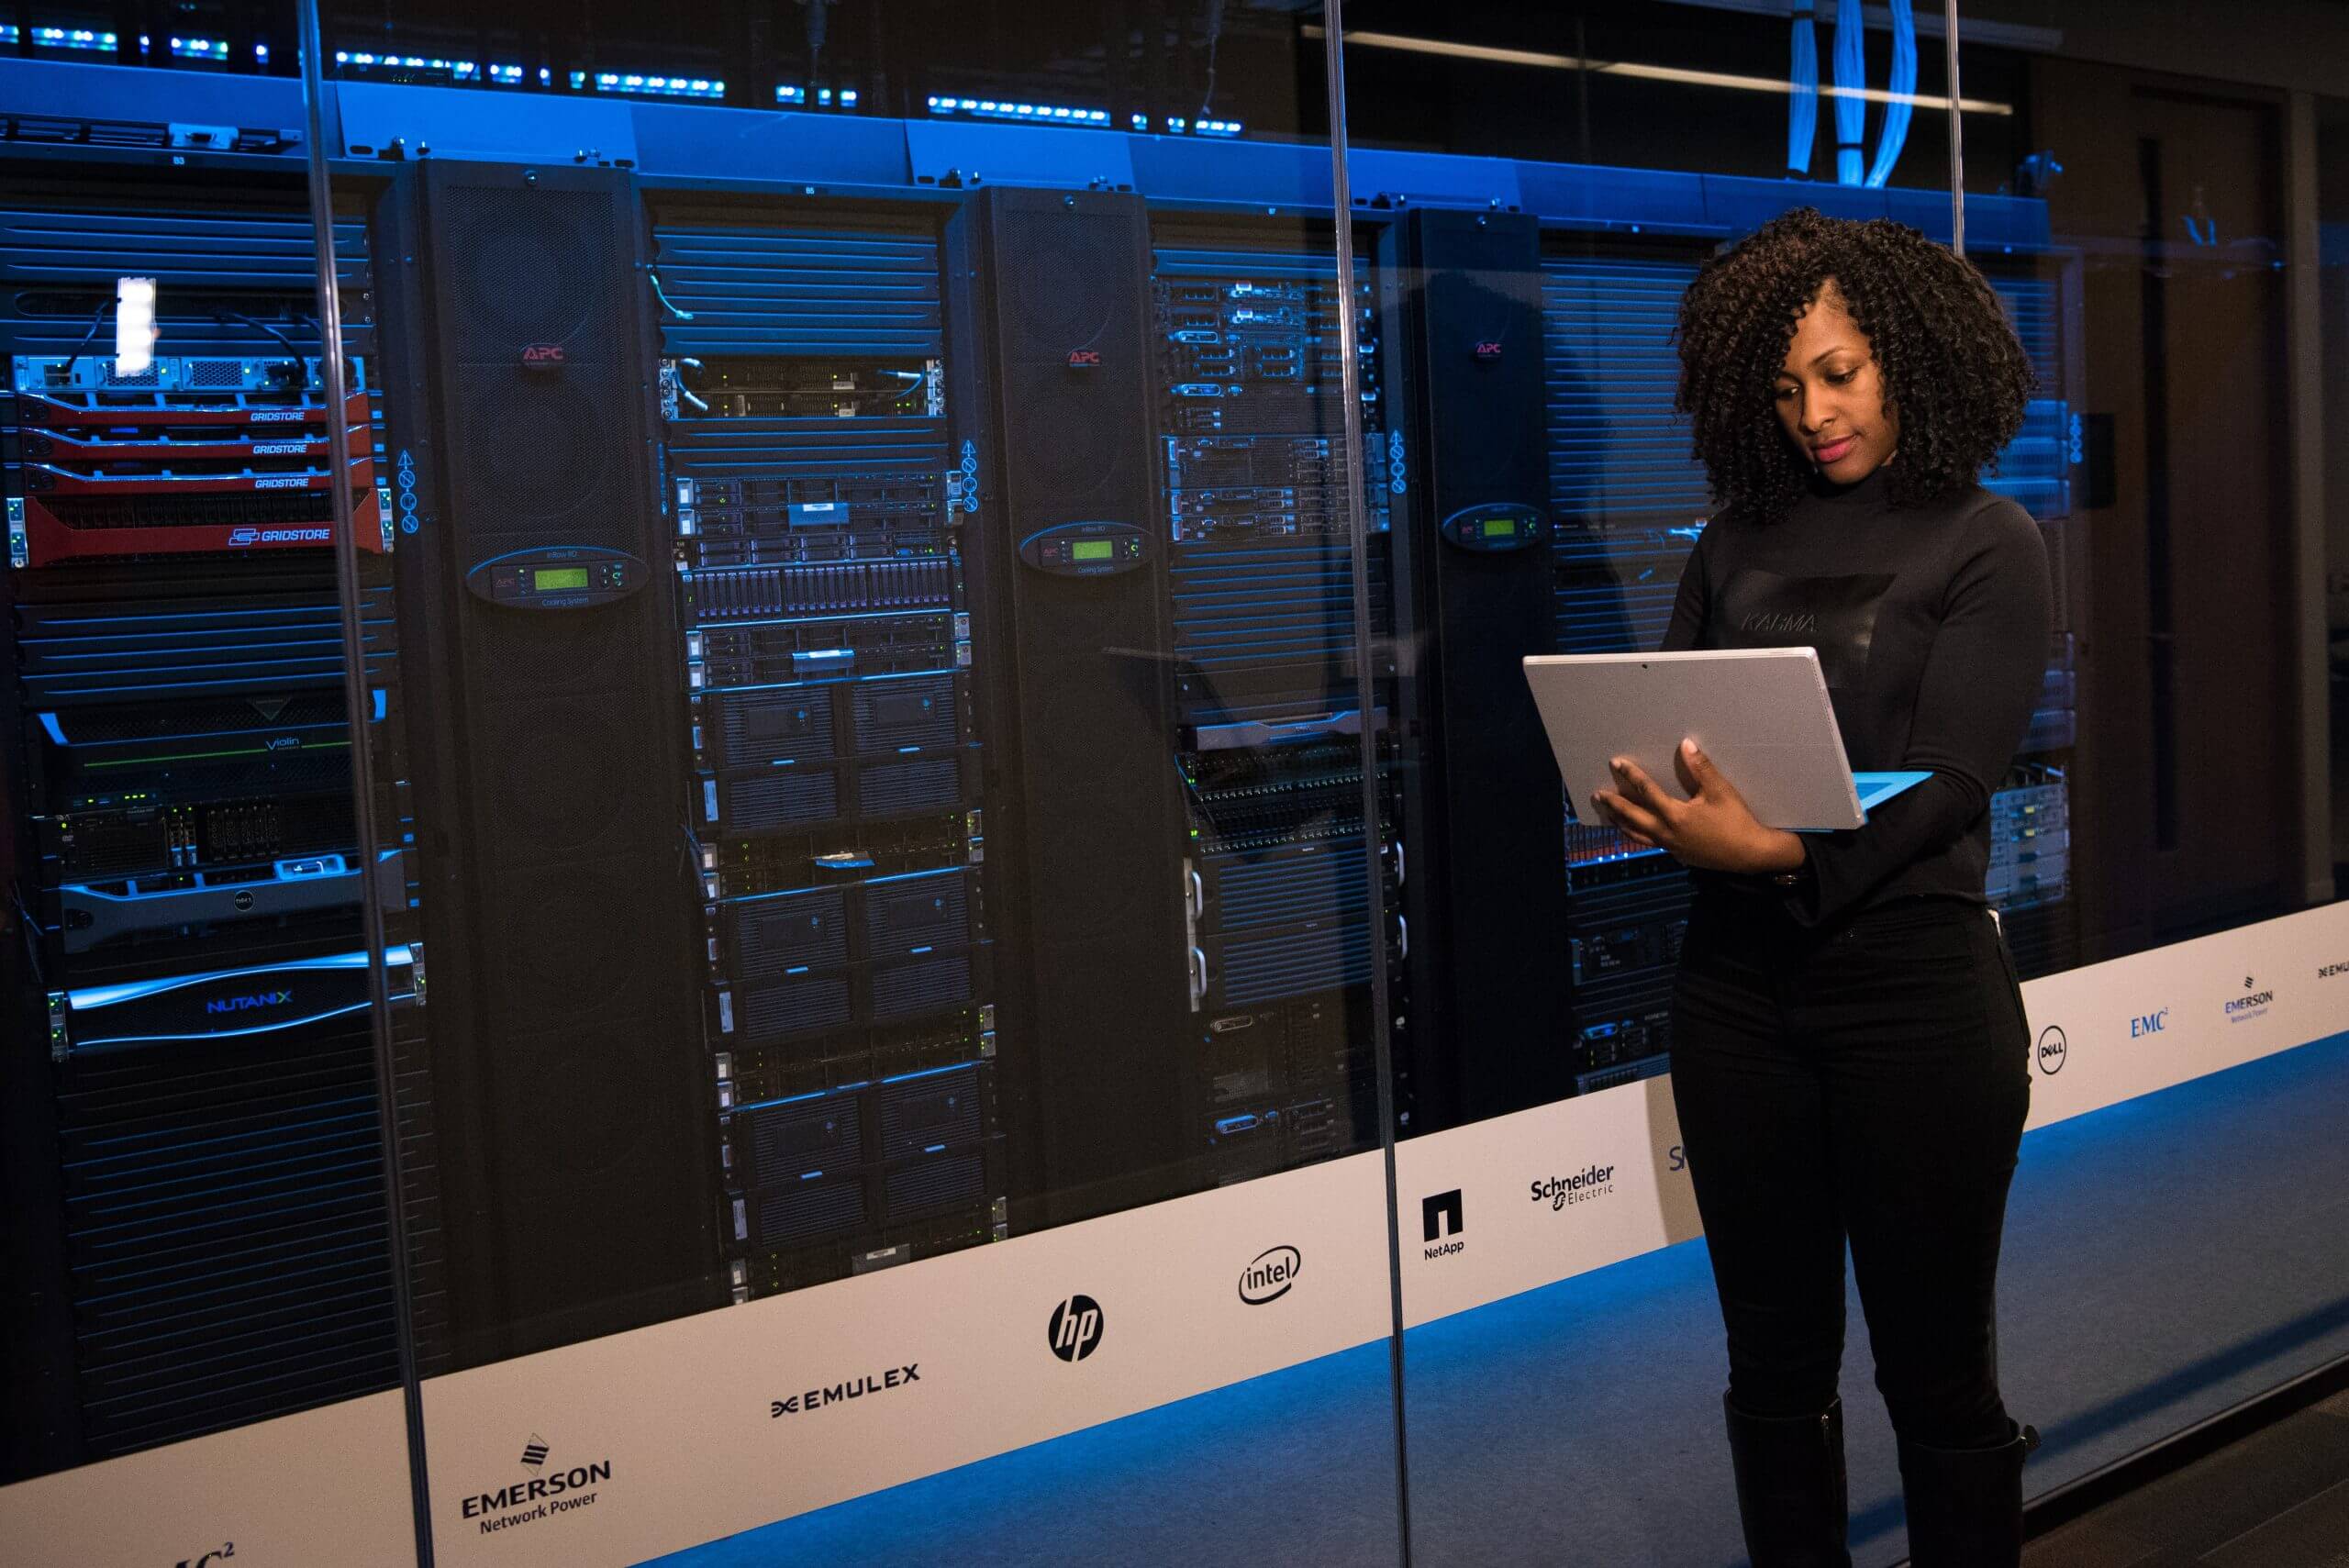 IT-support-woman-standing-while-carrying-laptop-in-a-data-center